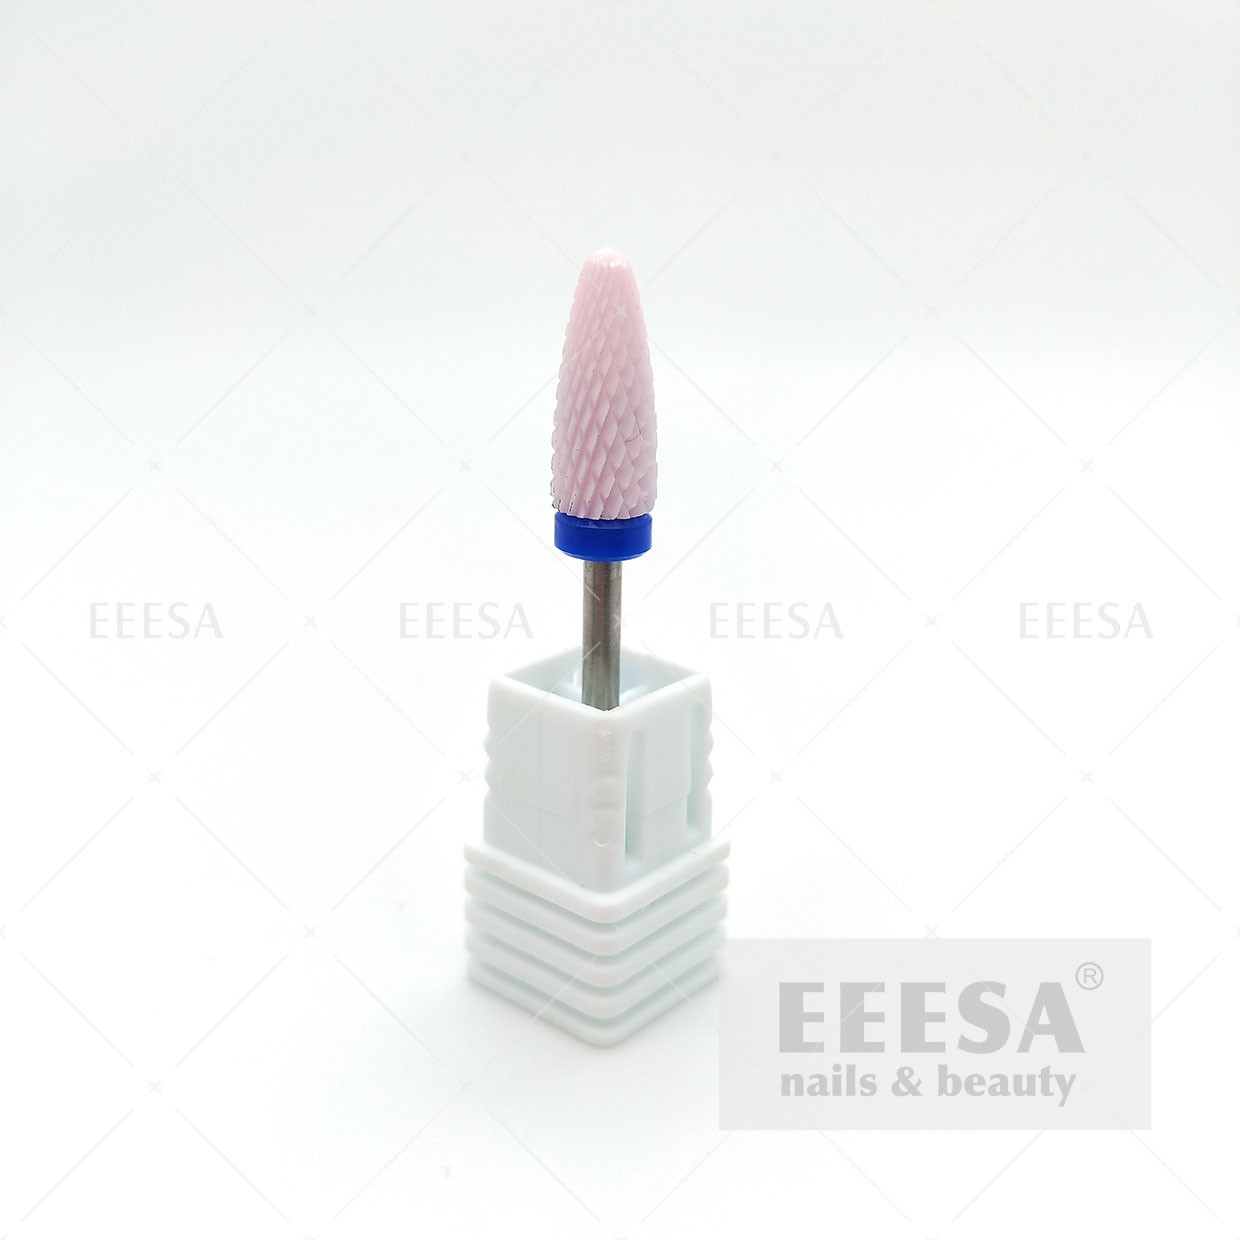  Manicure Pedicure Nails Beauty Ceramic Nail File Nail Drill Bit Manufactures